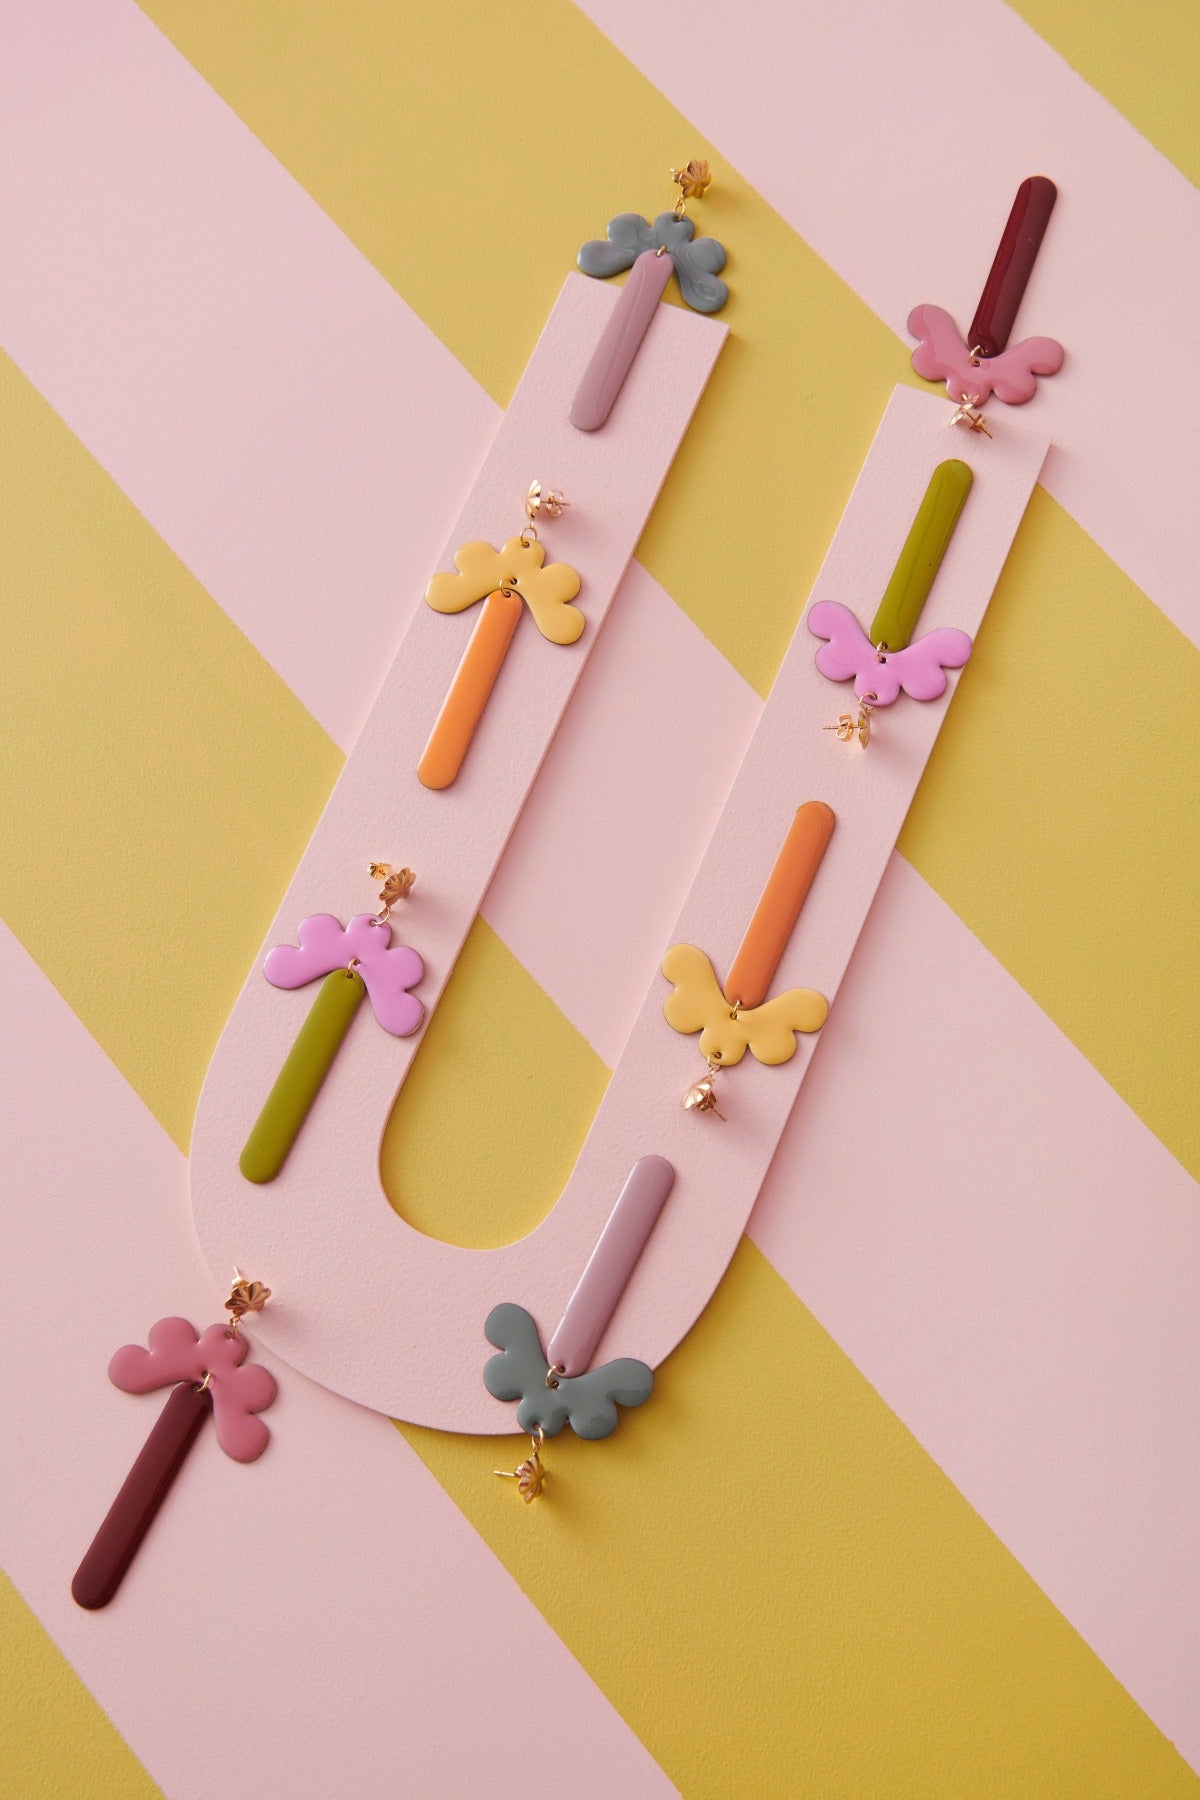 The Meadow earrings in the four colourways; duckegg and mauve, yellow and pumpkin, orchid and avocado, and pink and coffee. are styled against a yellow and pink striped background. The earrings are lined in two rows along a pink U shaped board.